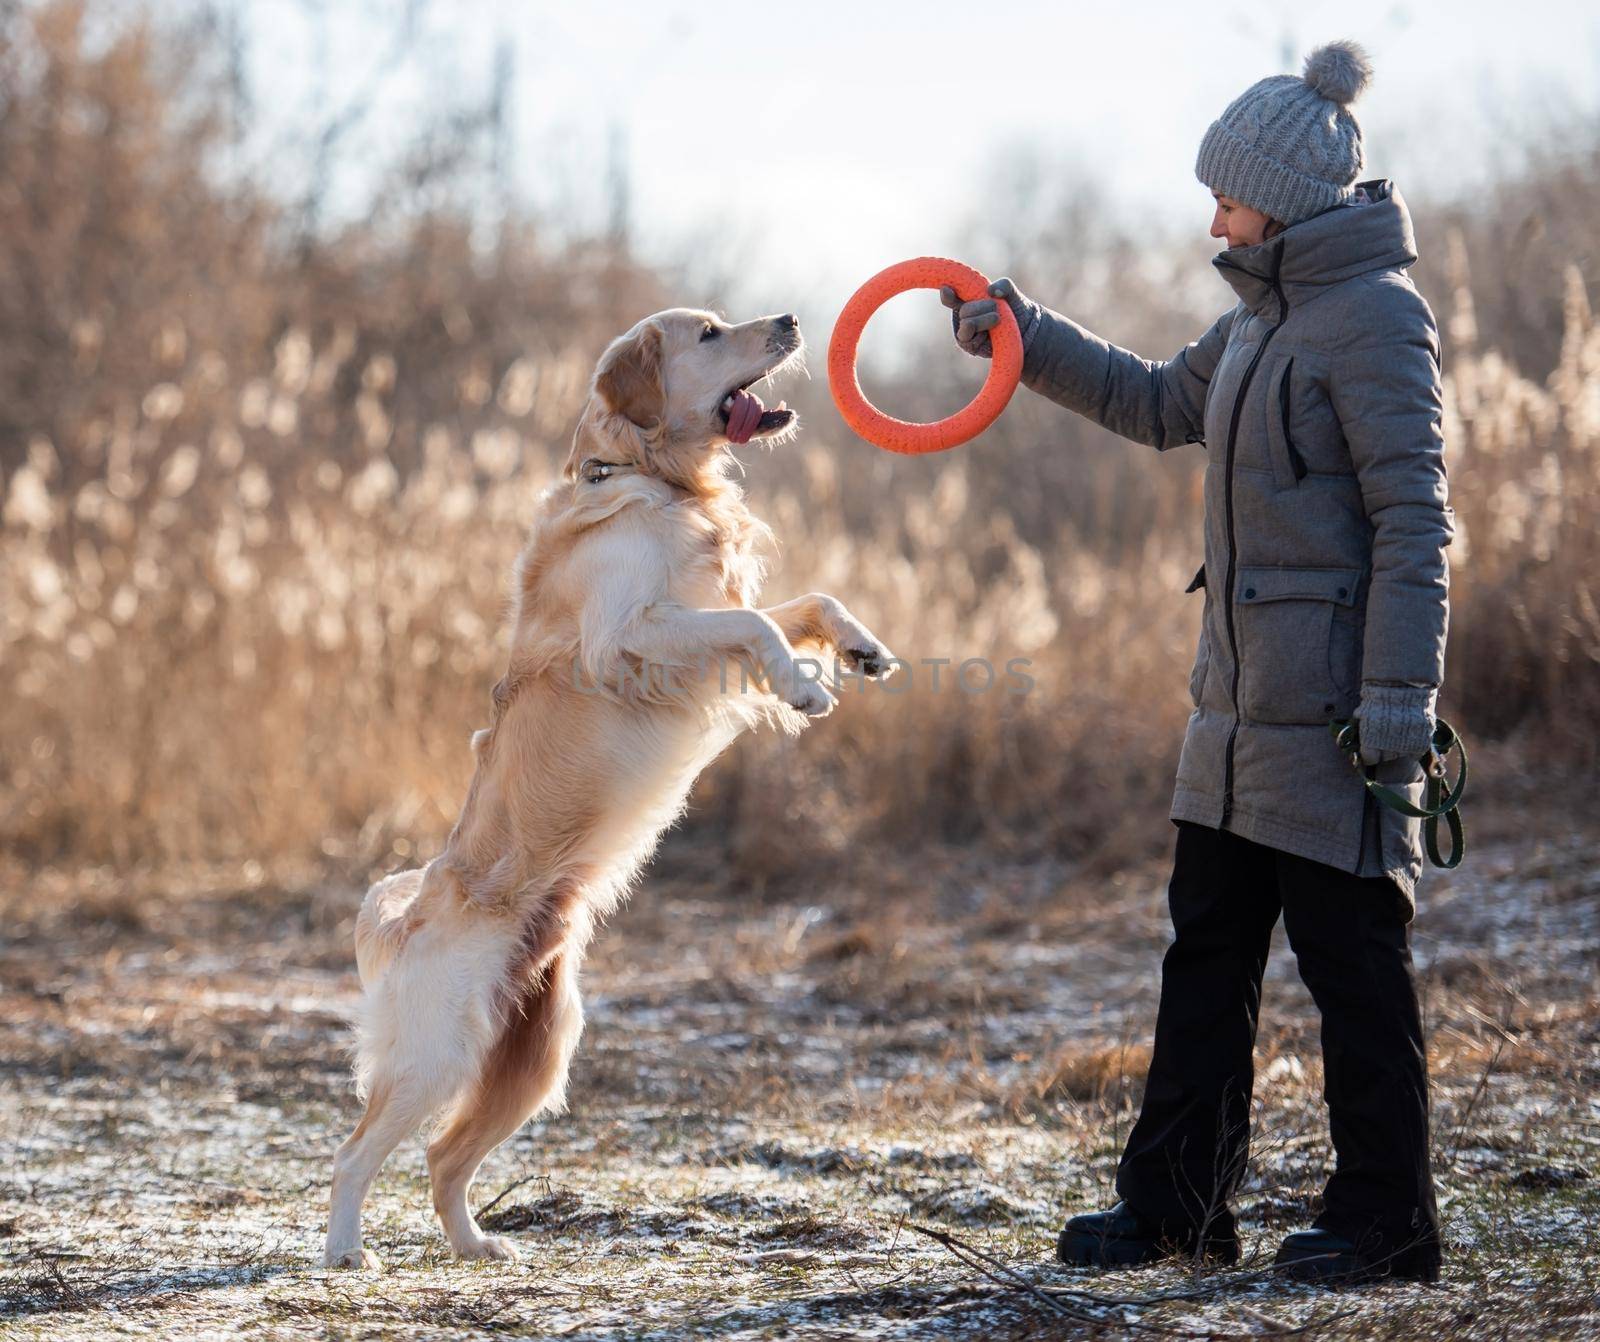 Woman owner wearing coat and hat training golden retriever dog with orange toy circle at the nature in early spring time. Girl playing with doggy pet labrador outdoors